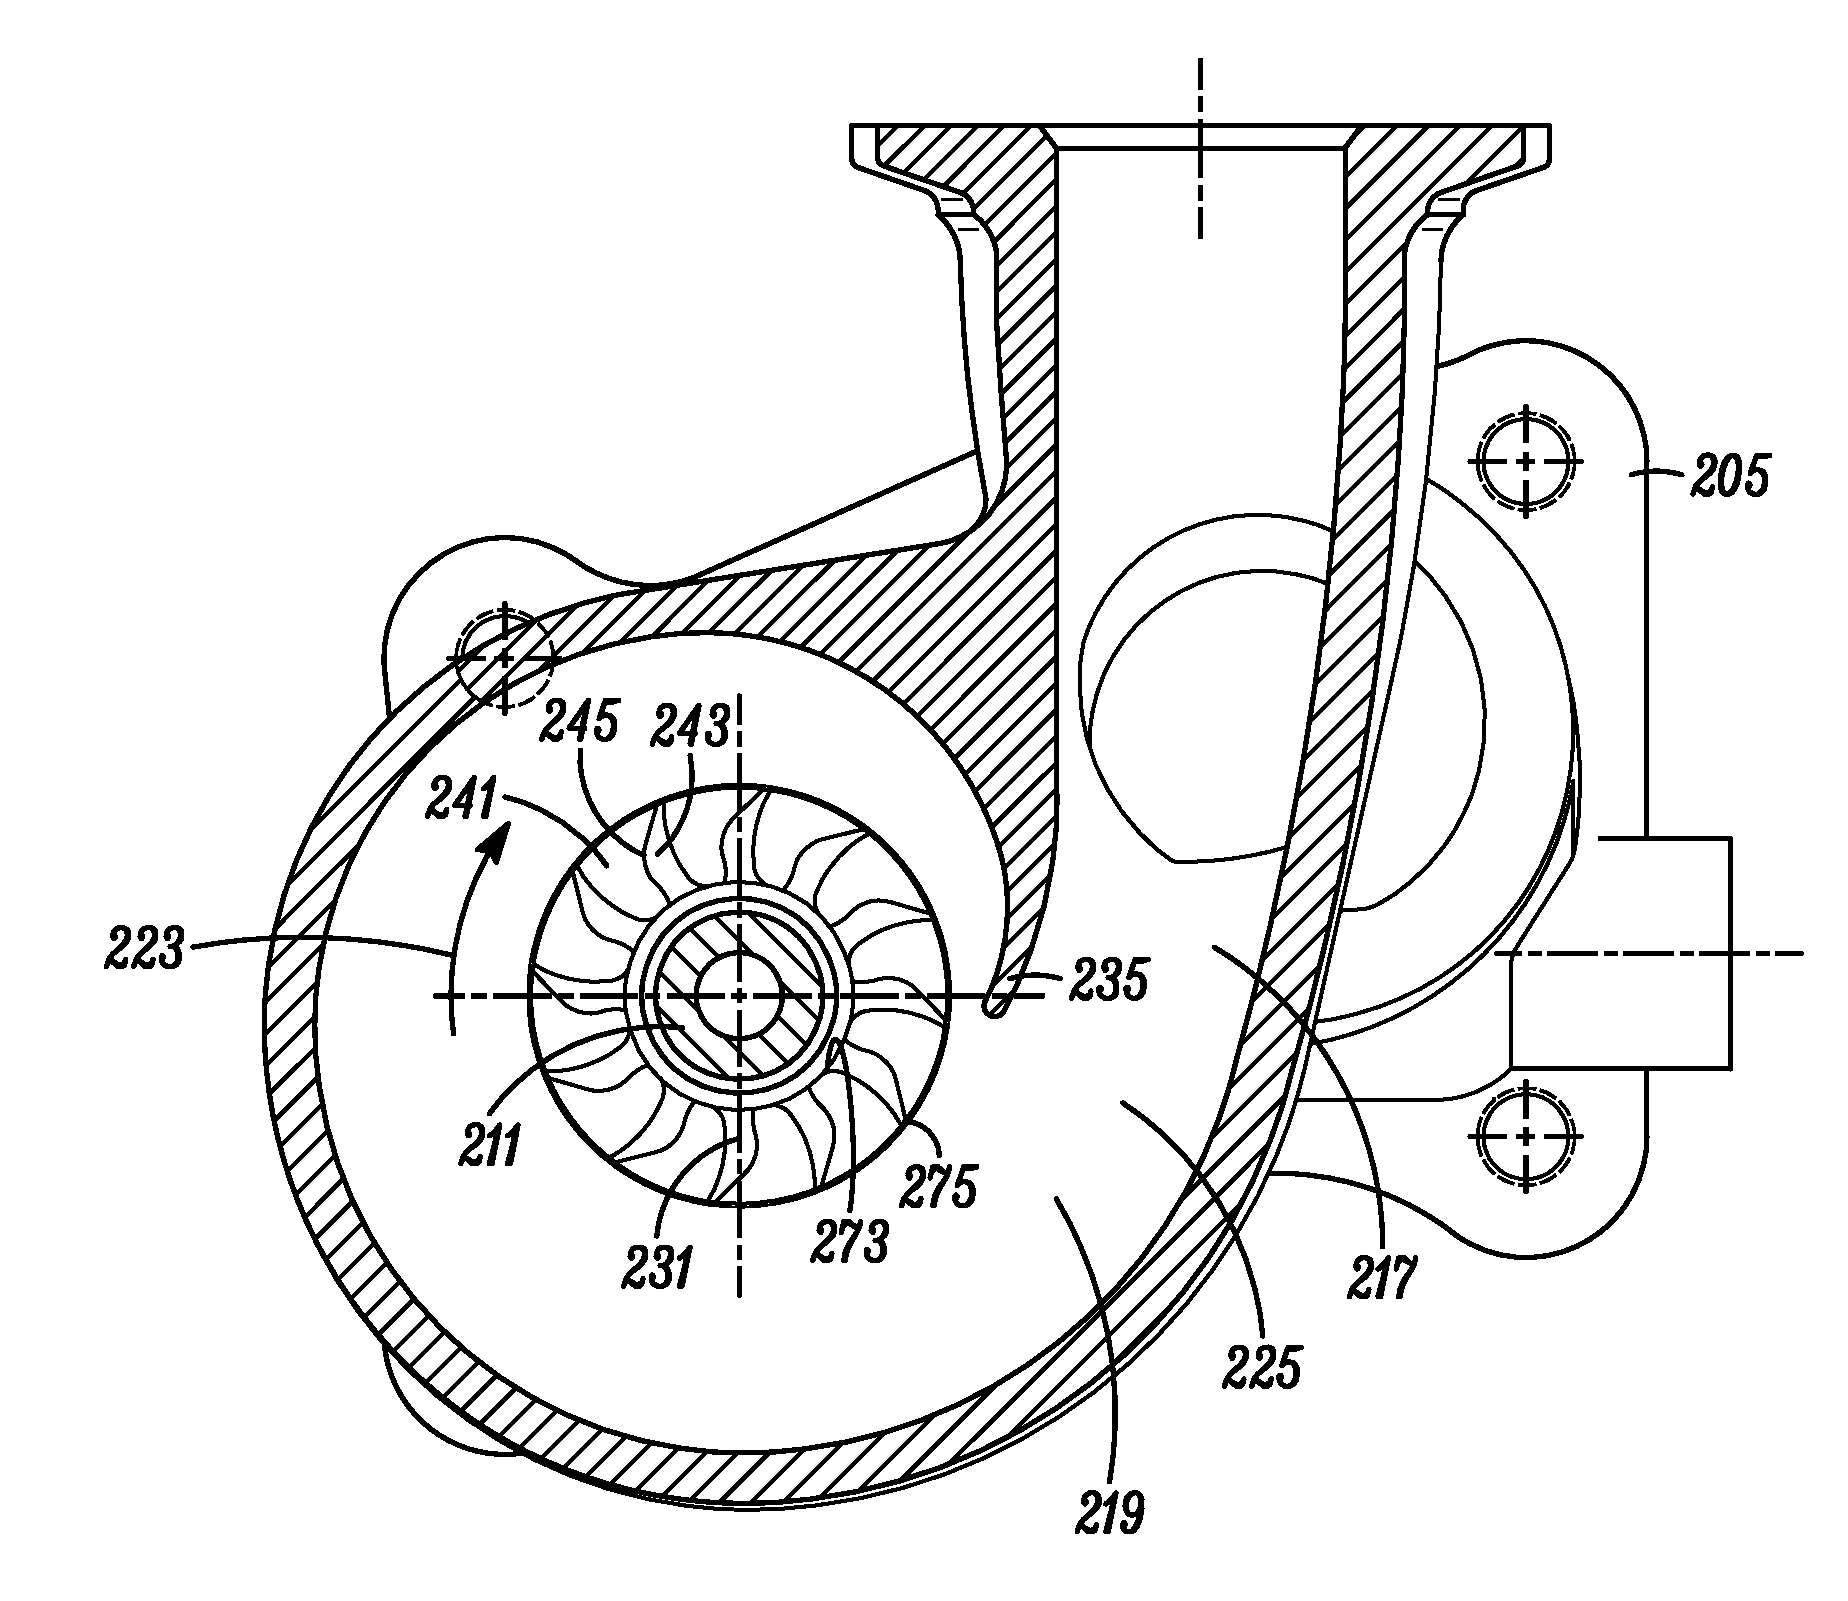 Axial turbine wheel with curved leading edge